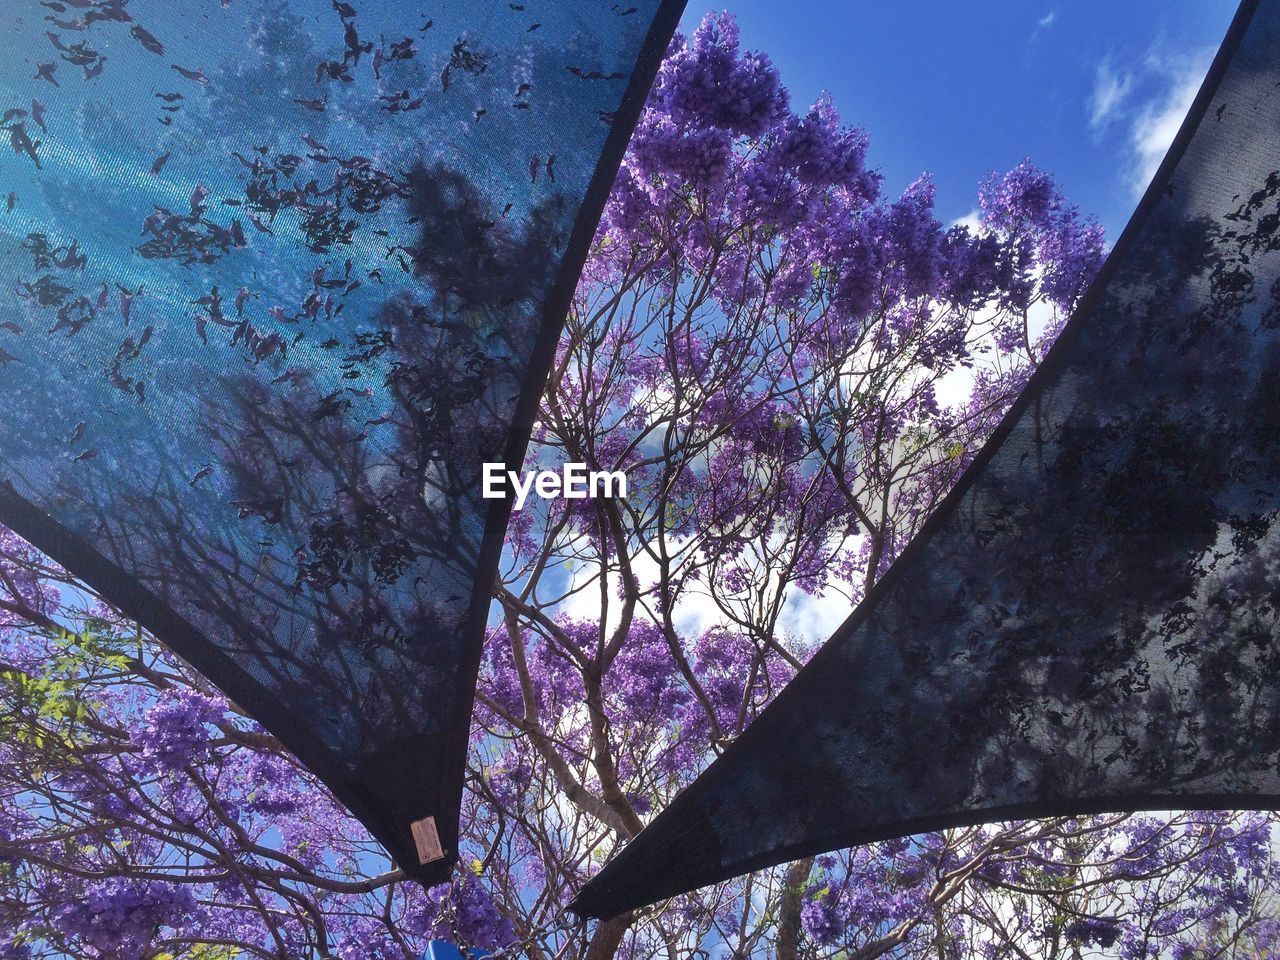 Low angle view of purple flowering trees seen through fabrics